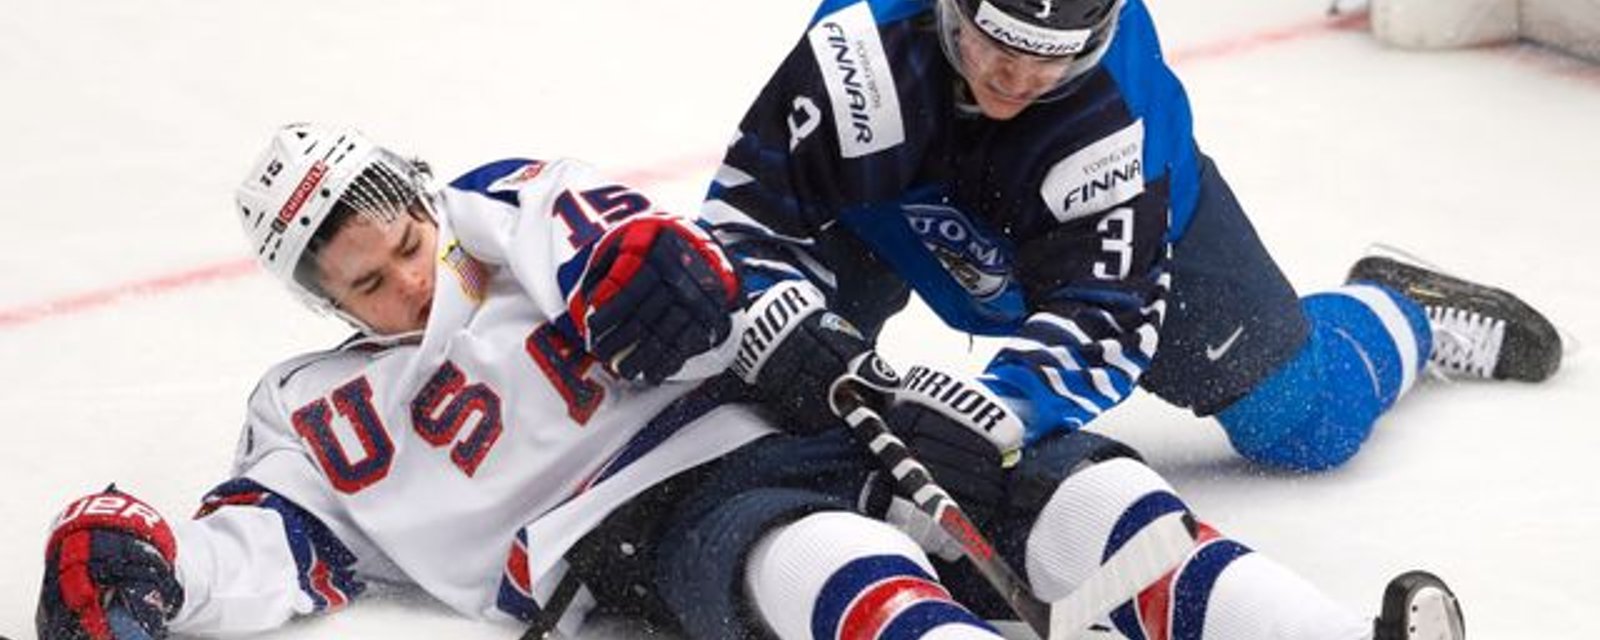 IIHF gets involved as tempers flared and blood spilled in USA elimination game